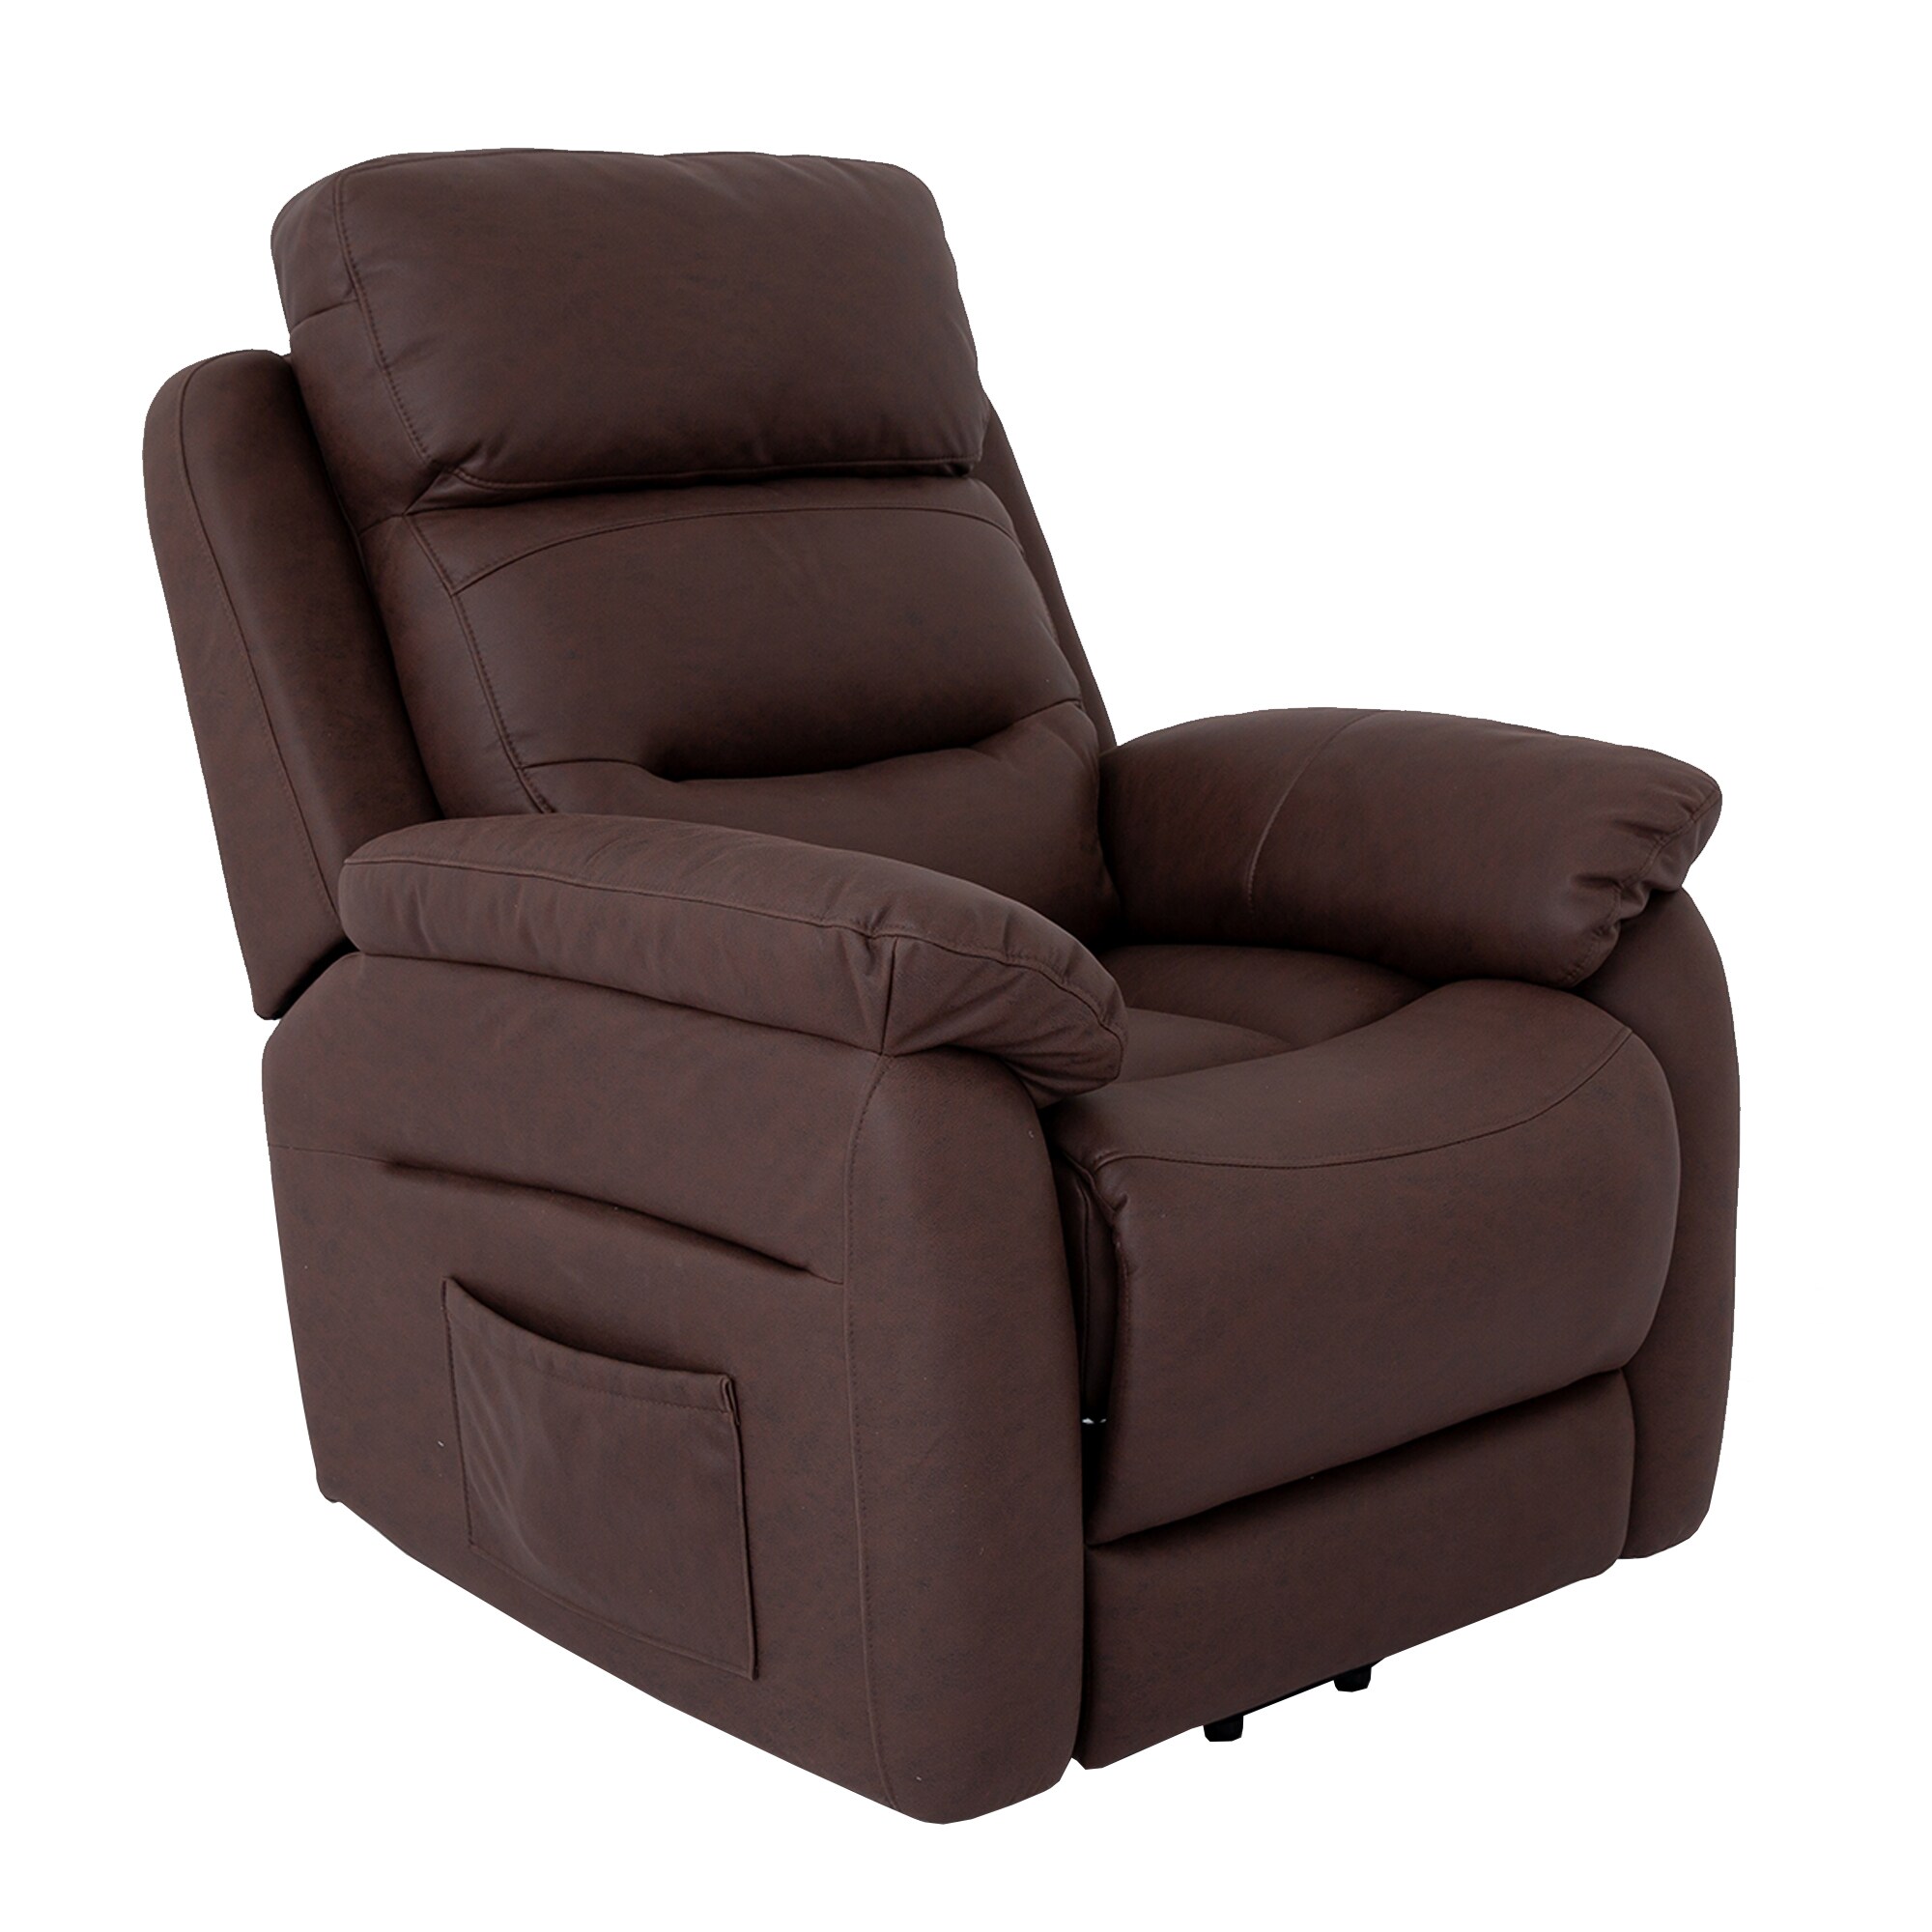 Powered Reclining Recliner, Dark Brown Leather Electric Reclining Chair